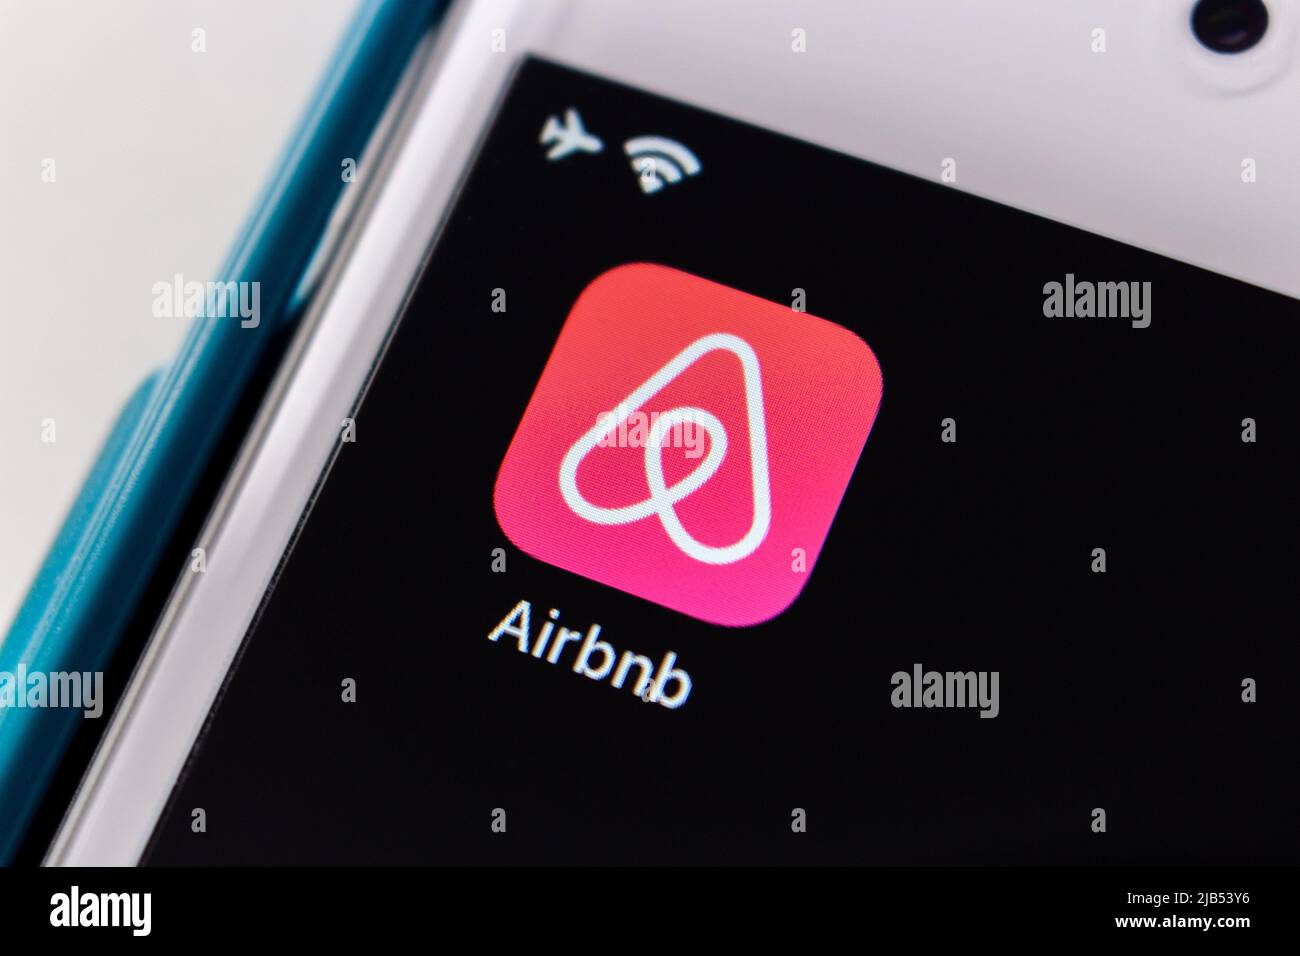 Kumamoto, JAPAN - Dec 17 2020 : Airbnb app, an US online service which lets people rent out the properties or spare rooms to guests via app, on iPhone Stock Photo